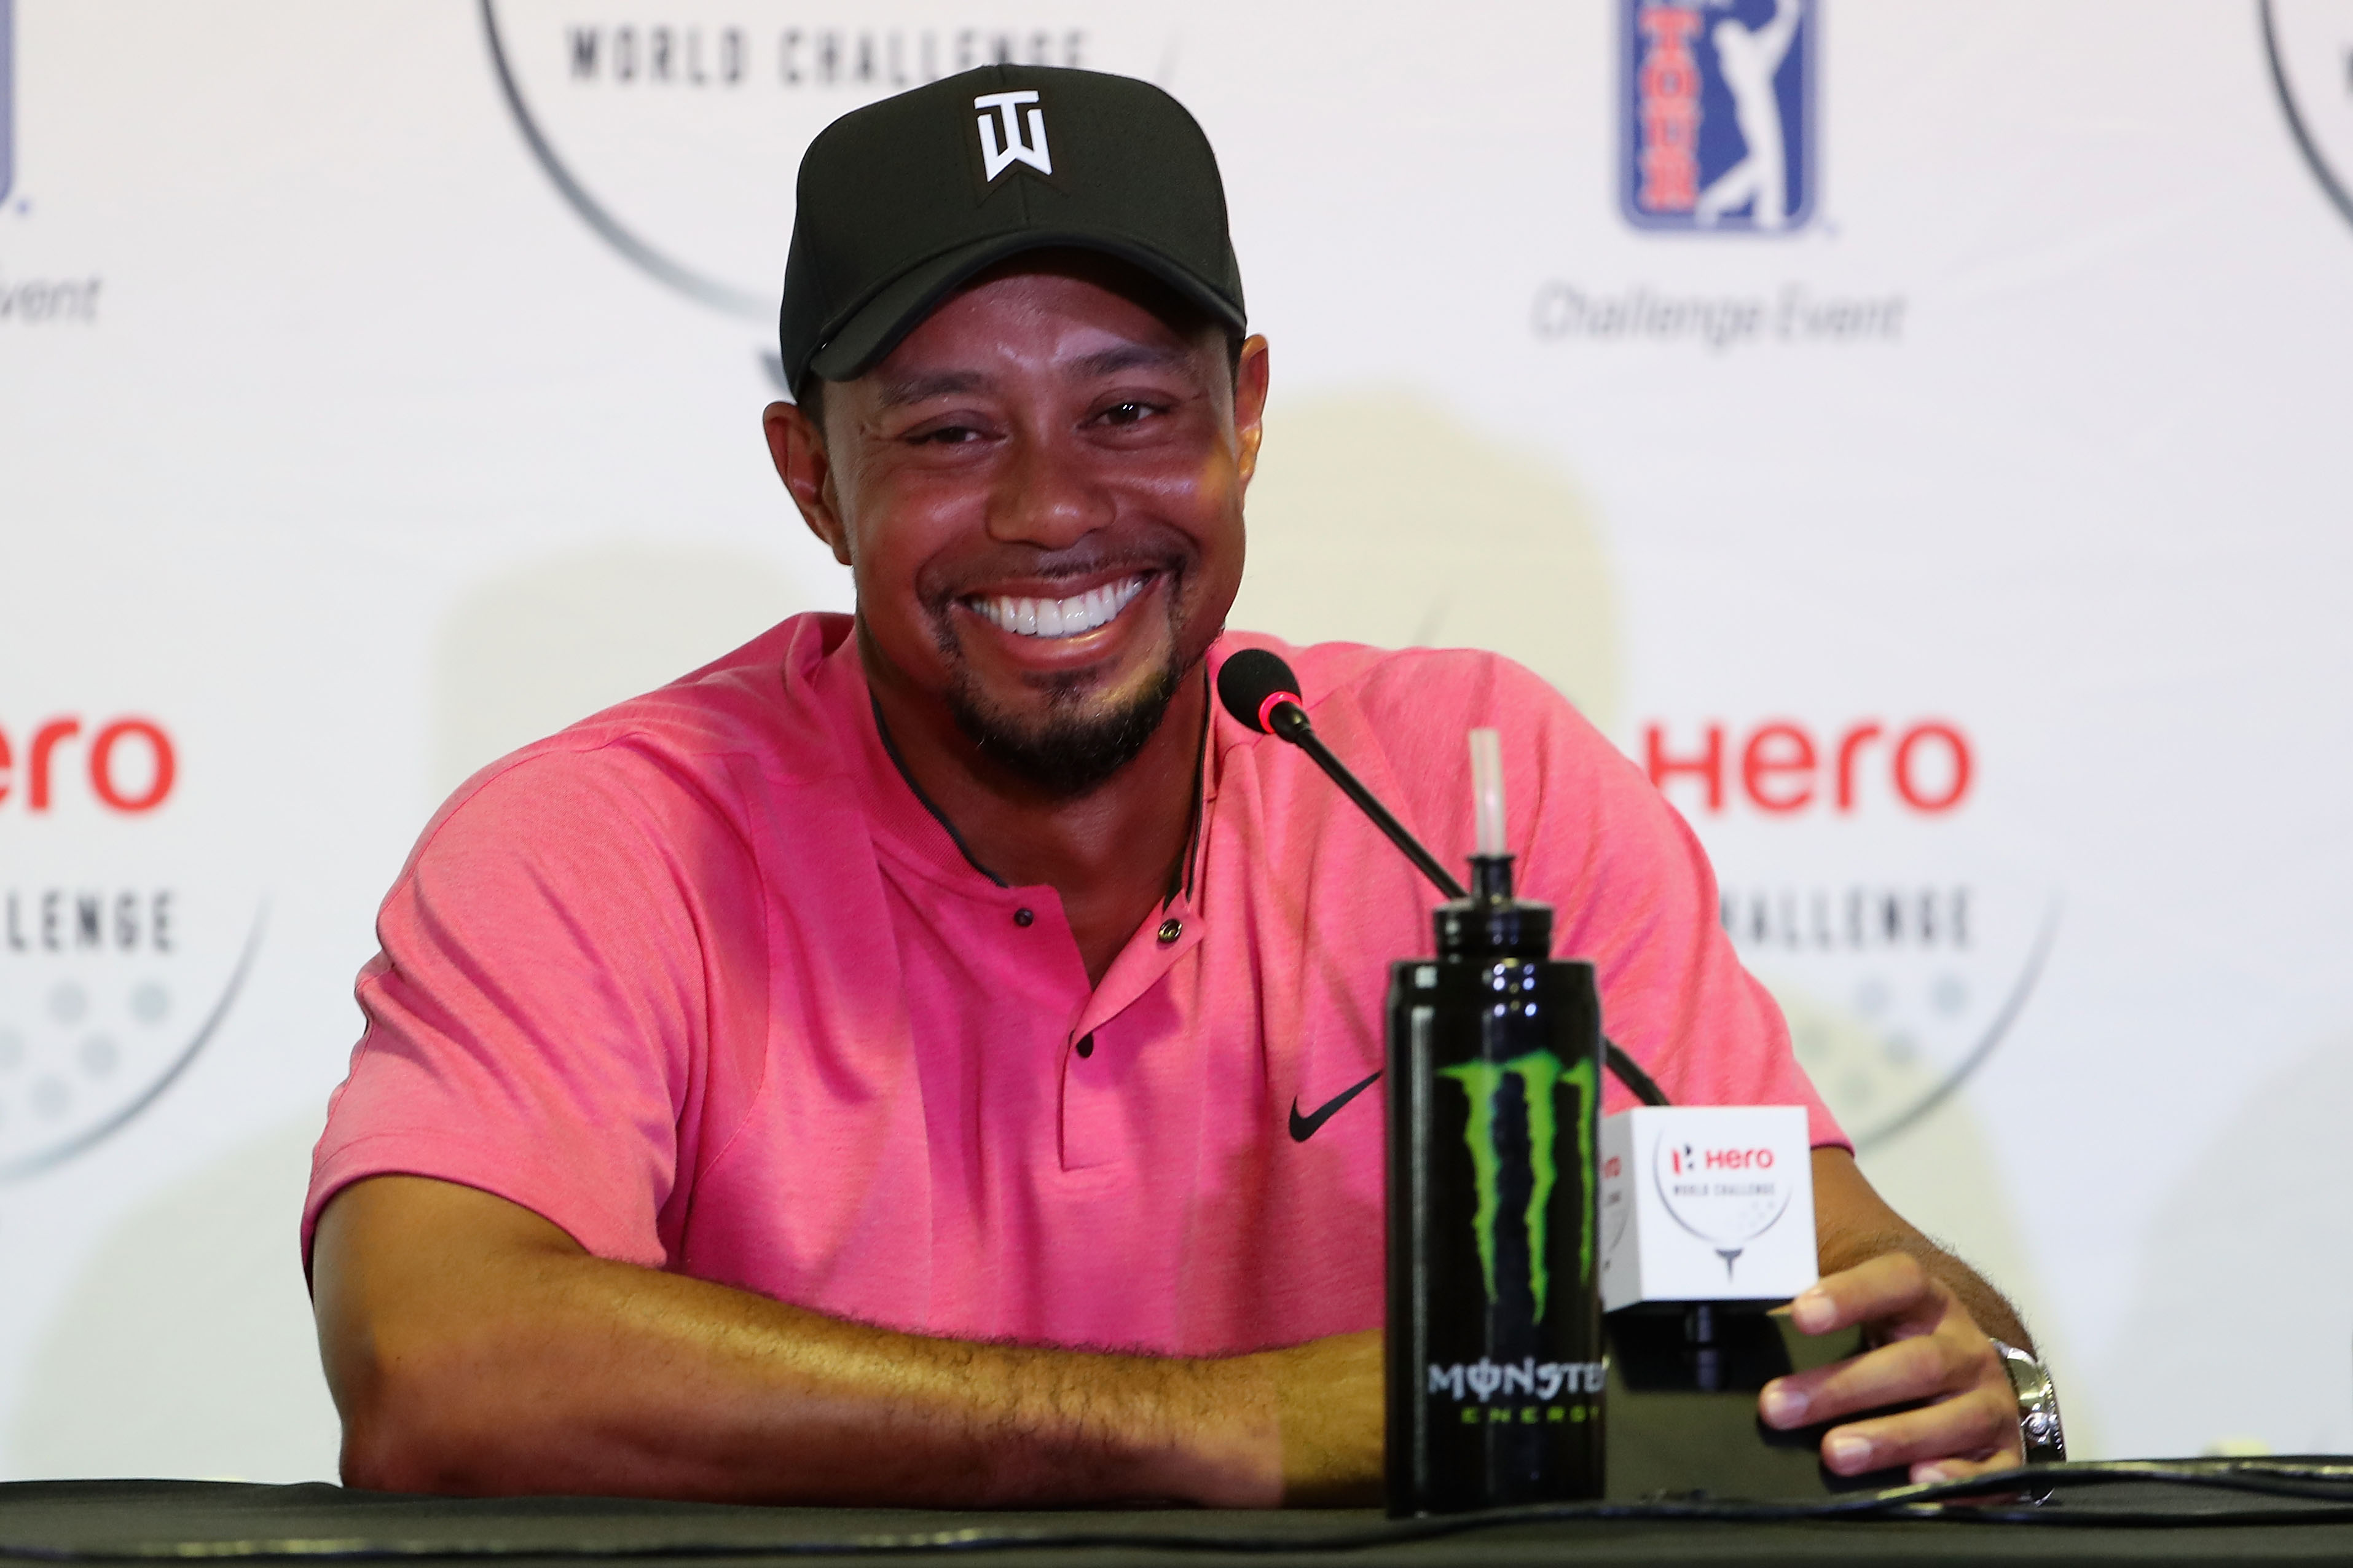 How Many Holes In One Has Tiger Woods Made In His Life